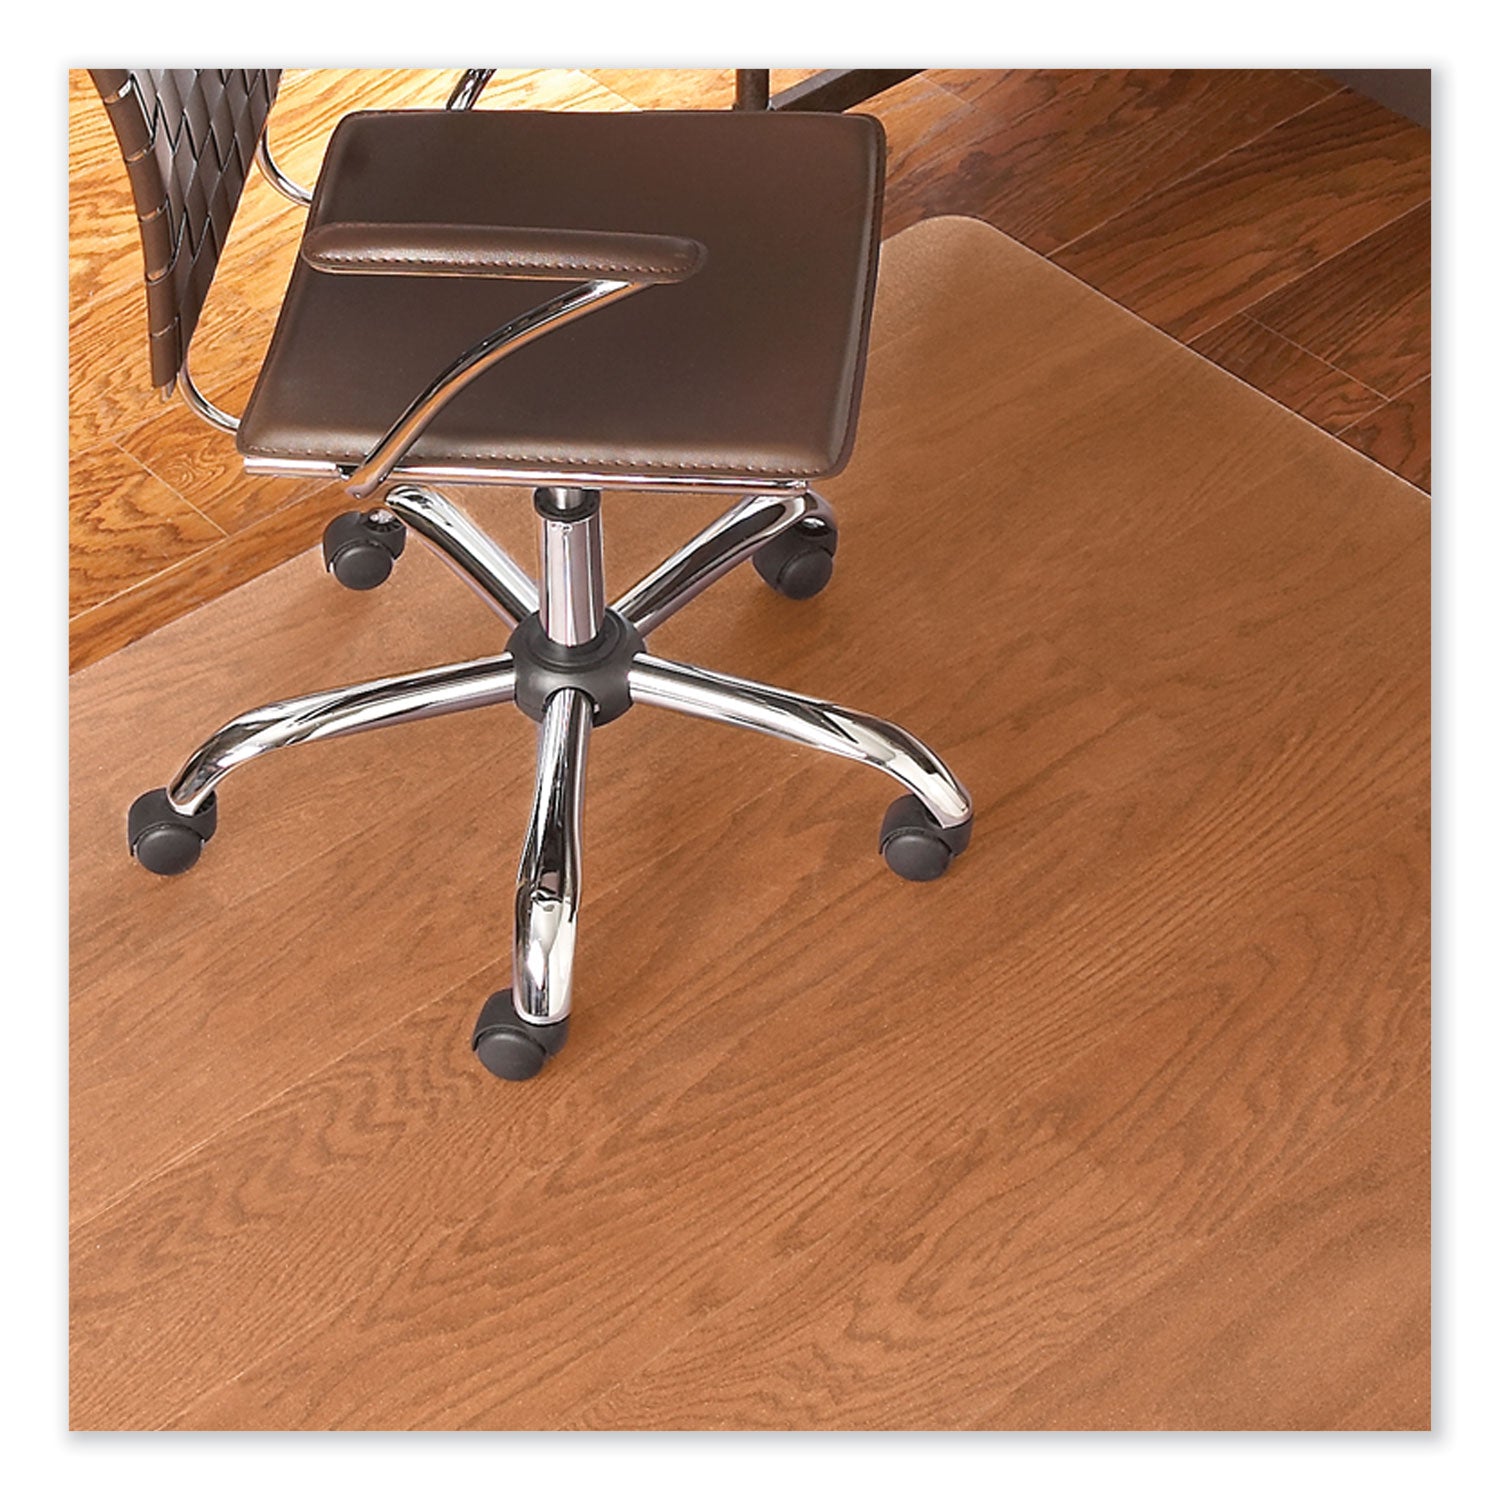 everlife-textured-chair-mat-for-hard-floors-square-60-x-60-clear-ships-in-4-6-business-days_esr132631 - 4